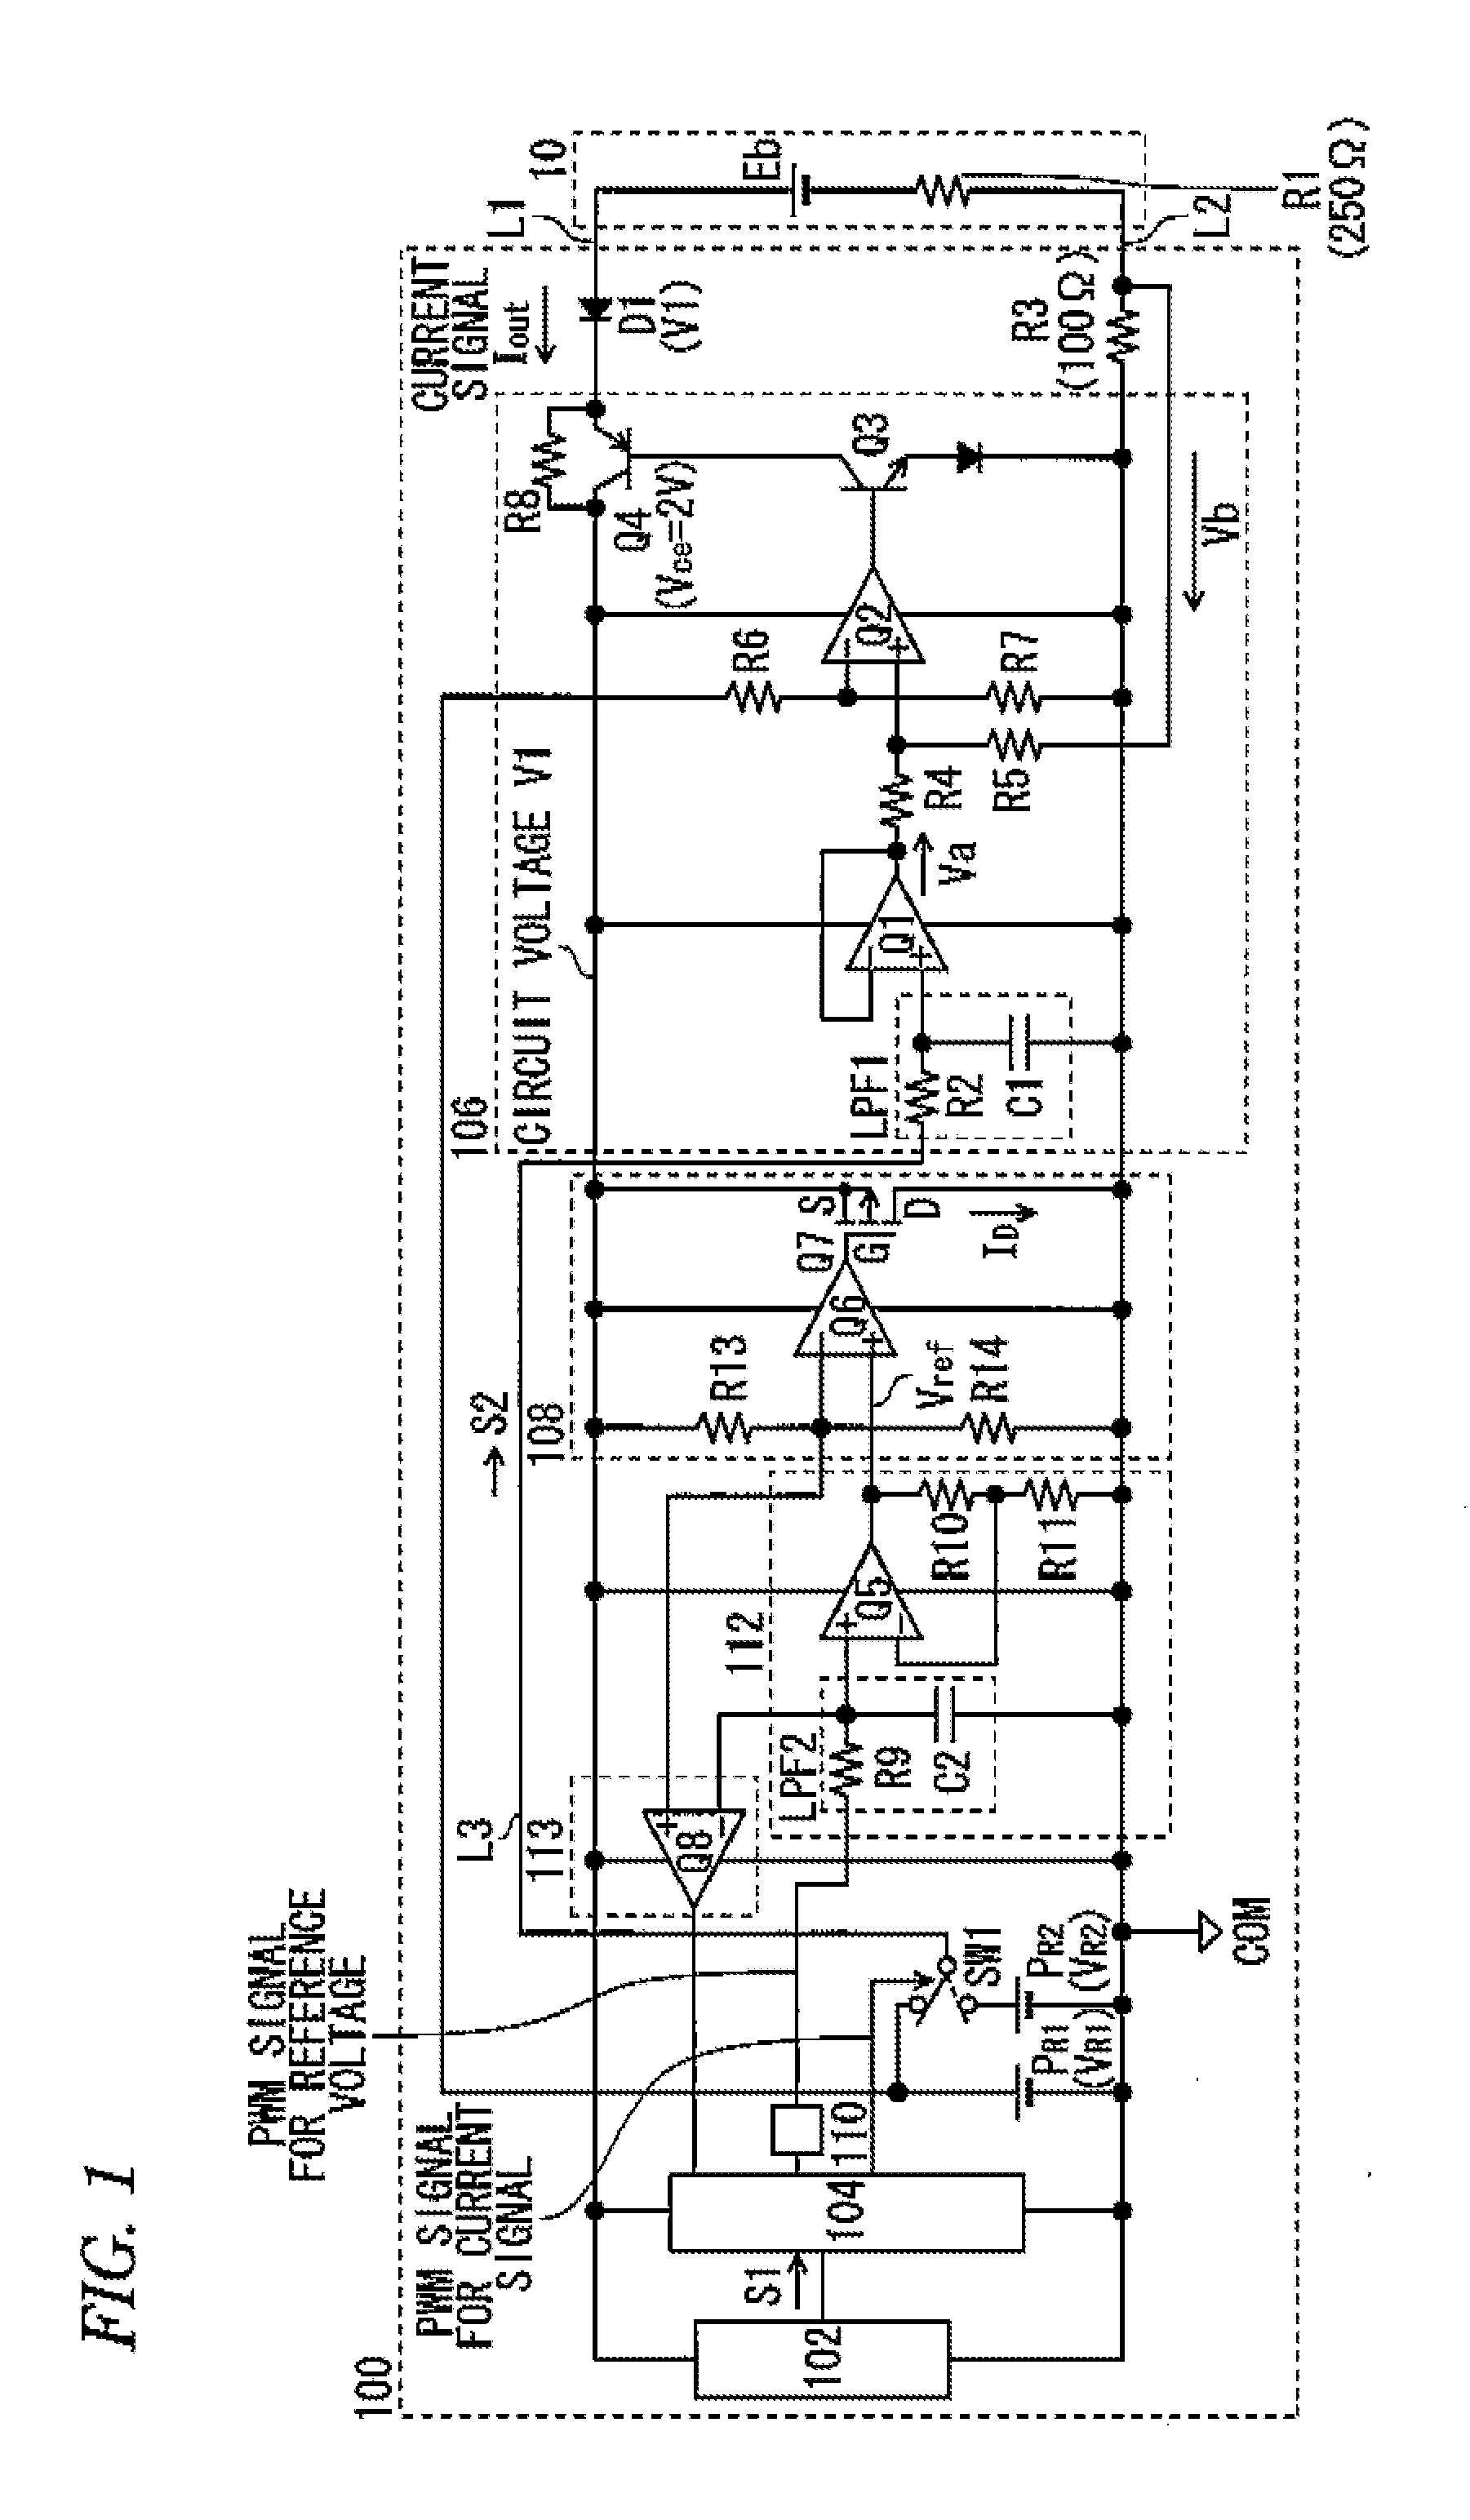 Two-wire transmitter